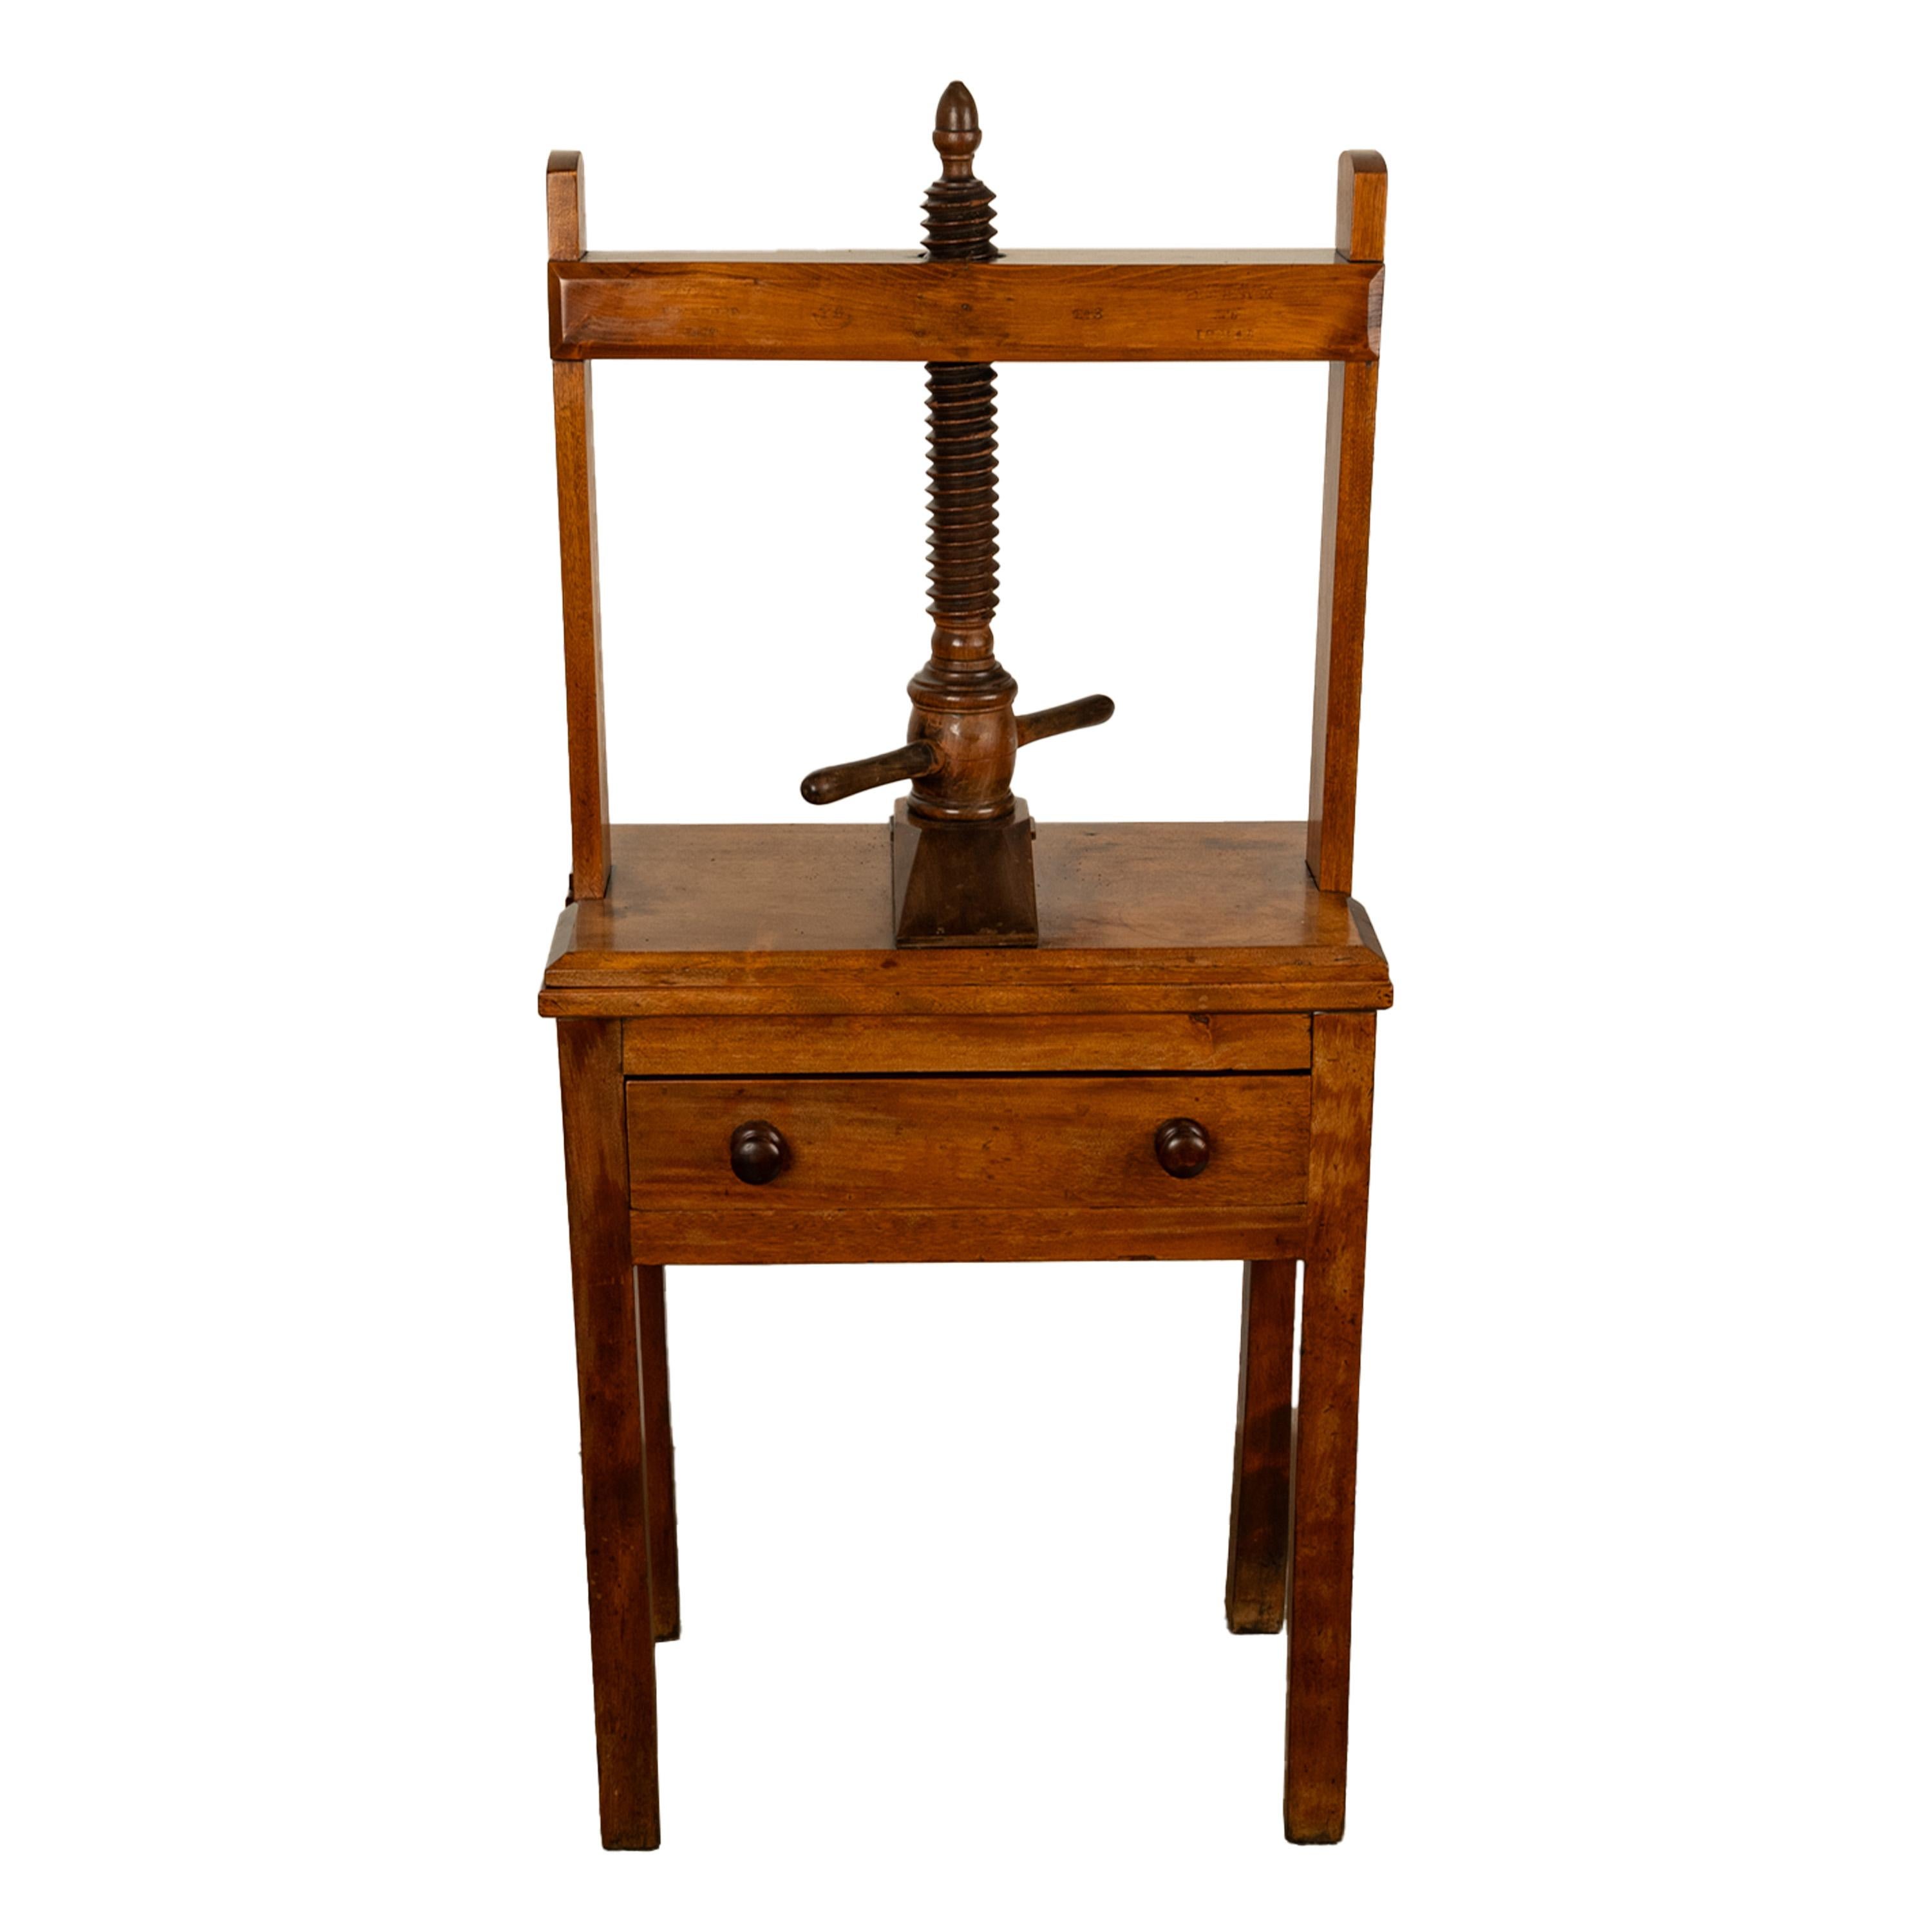 A good antique mahogany linen or book press by Tomas Bradford & Co, London & Manchester, circa 1860.
The press having an upper frame with a large turned wooden screw with a turning handle that operates a platform to apply pressure to the press, the